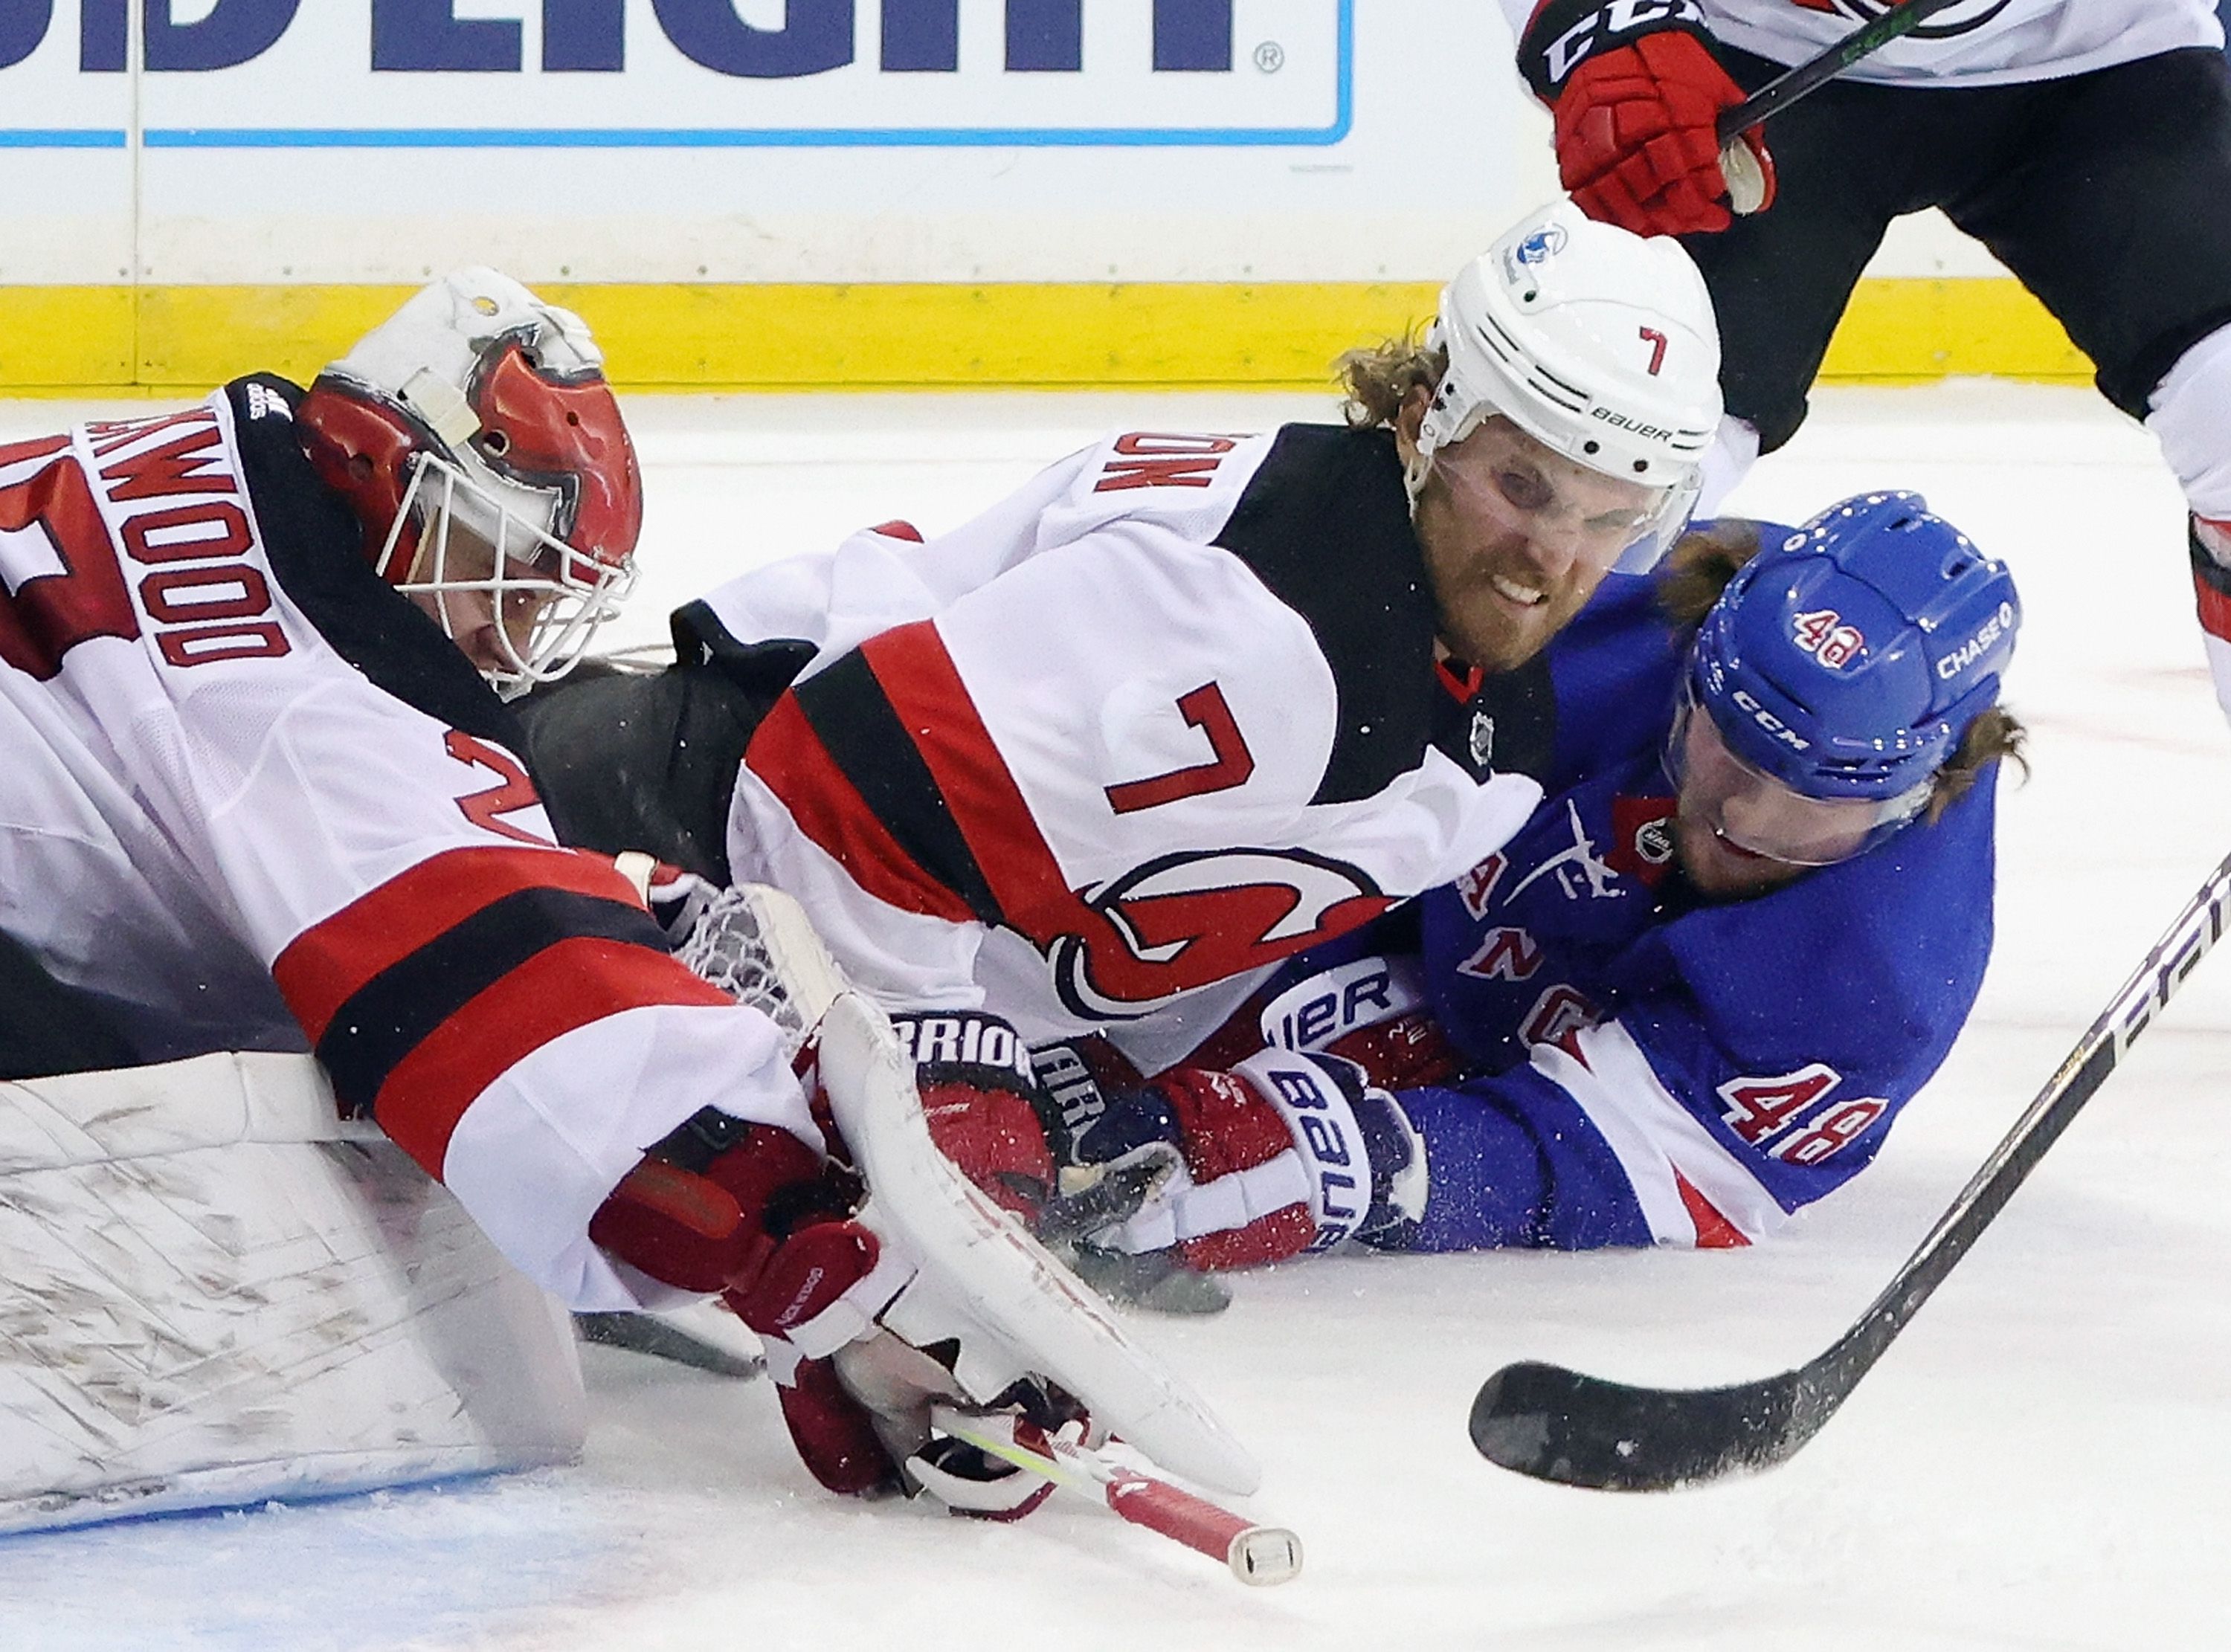 How to watch New York Rangers vs. New Jersey Devils (1/19/2021